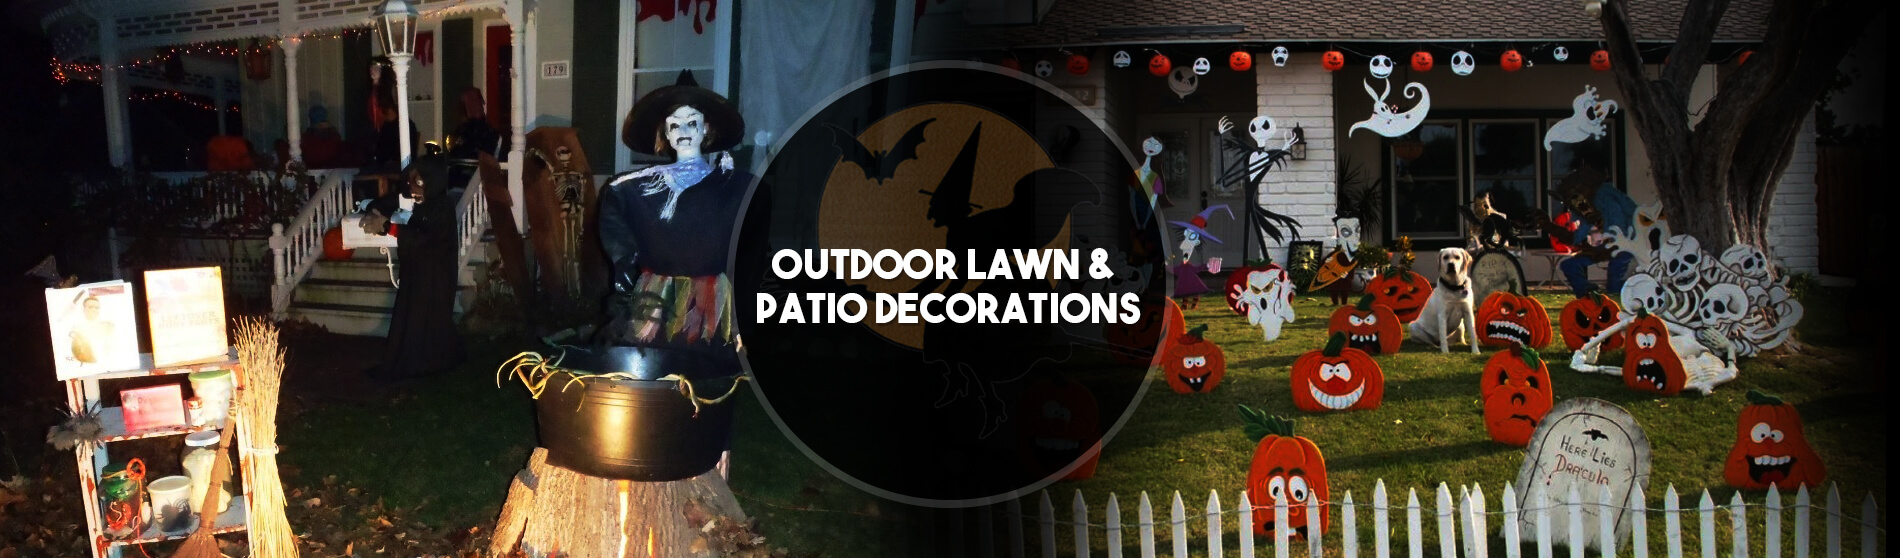 Glendale Halloween : Outdoor-Lawn-Patio-Decorations